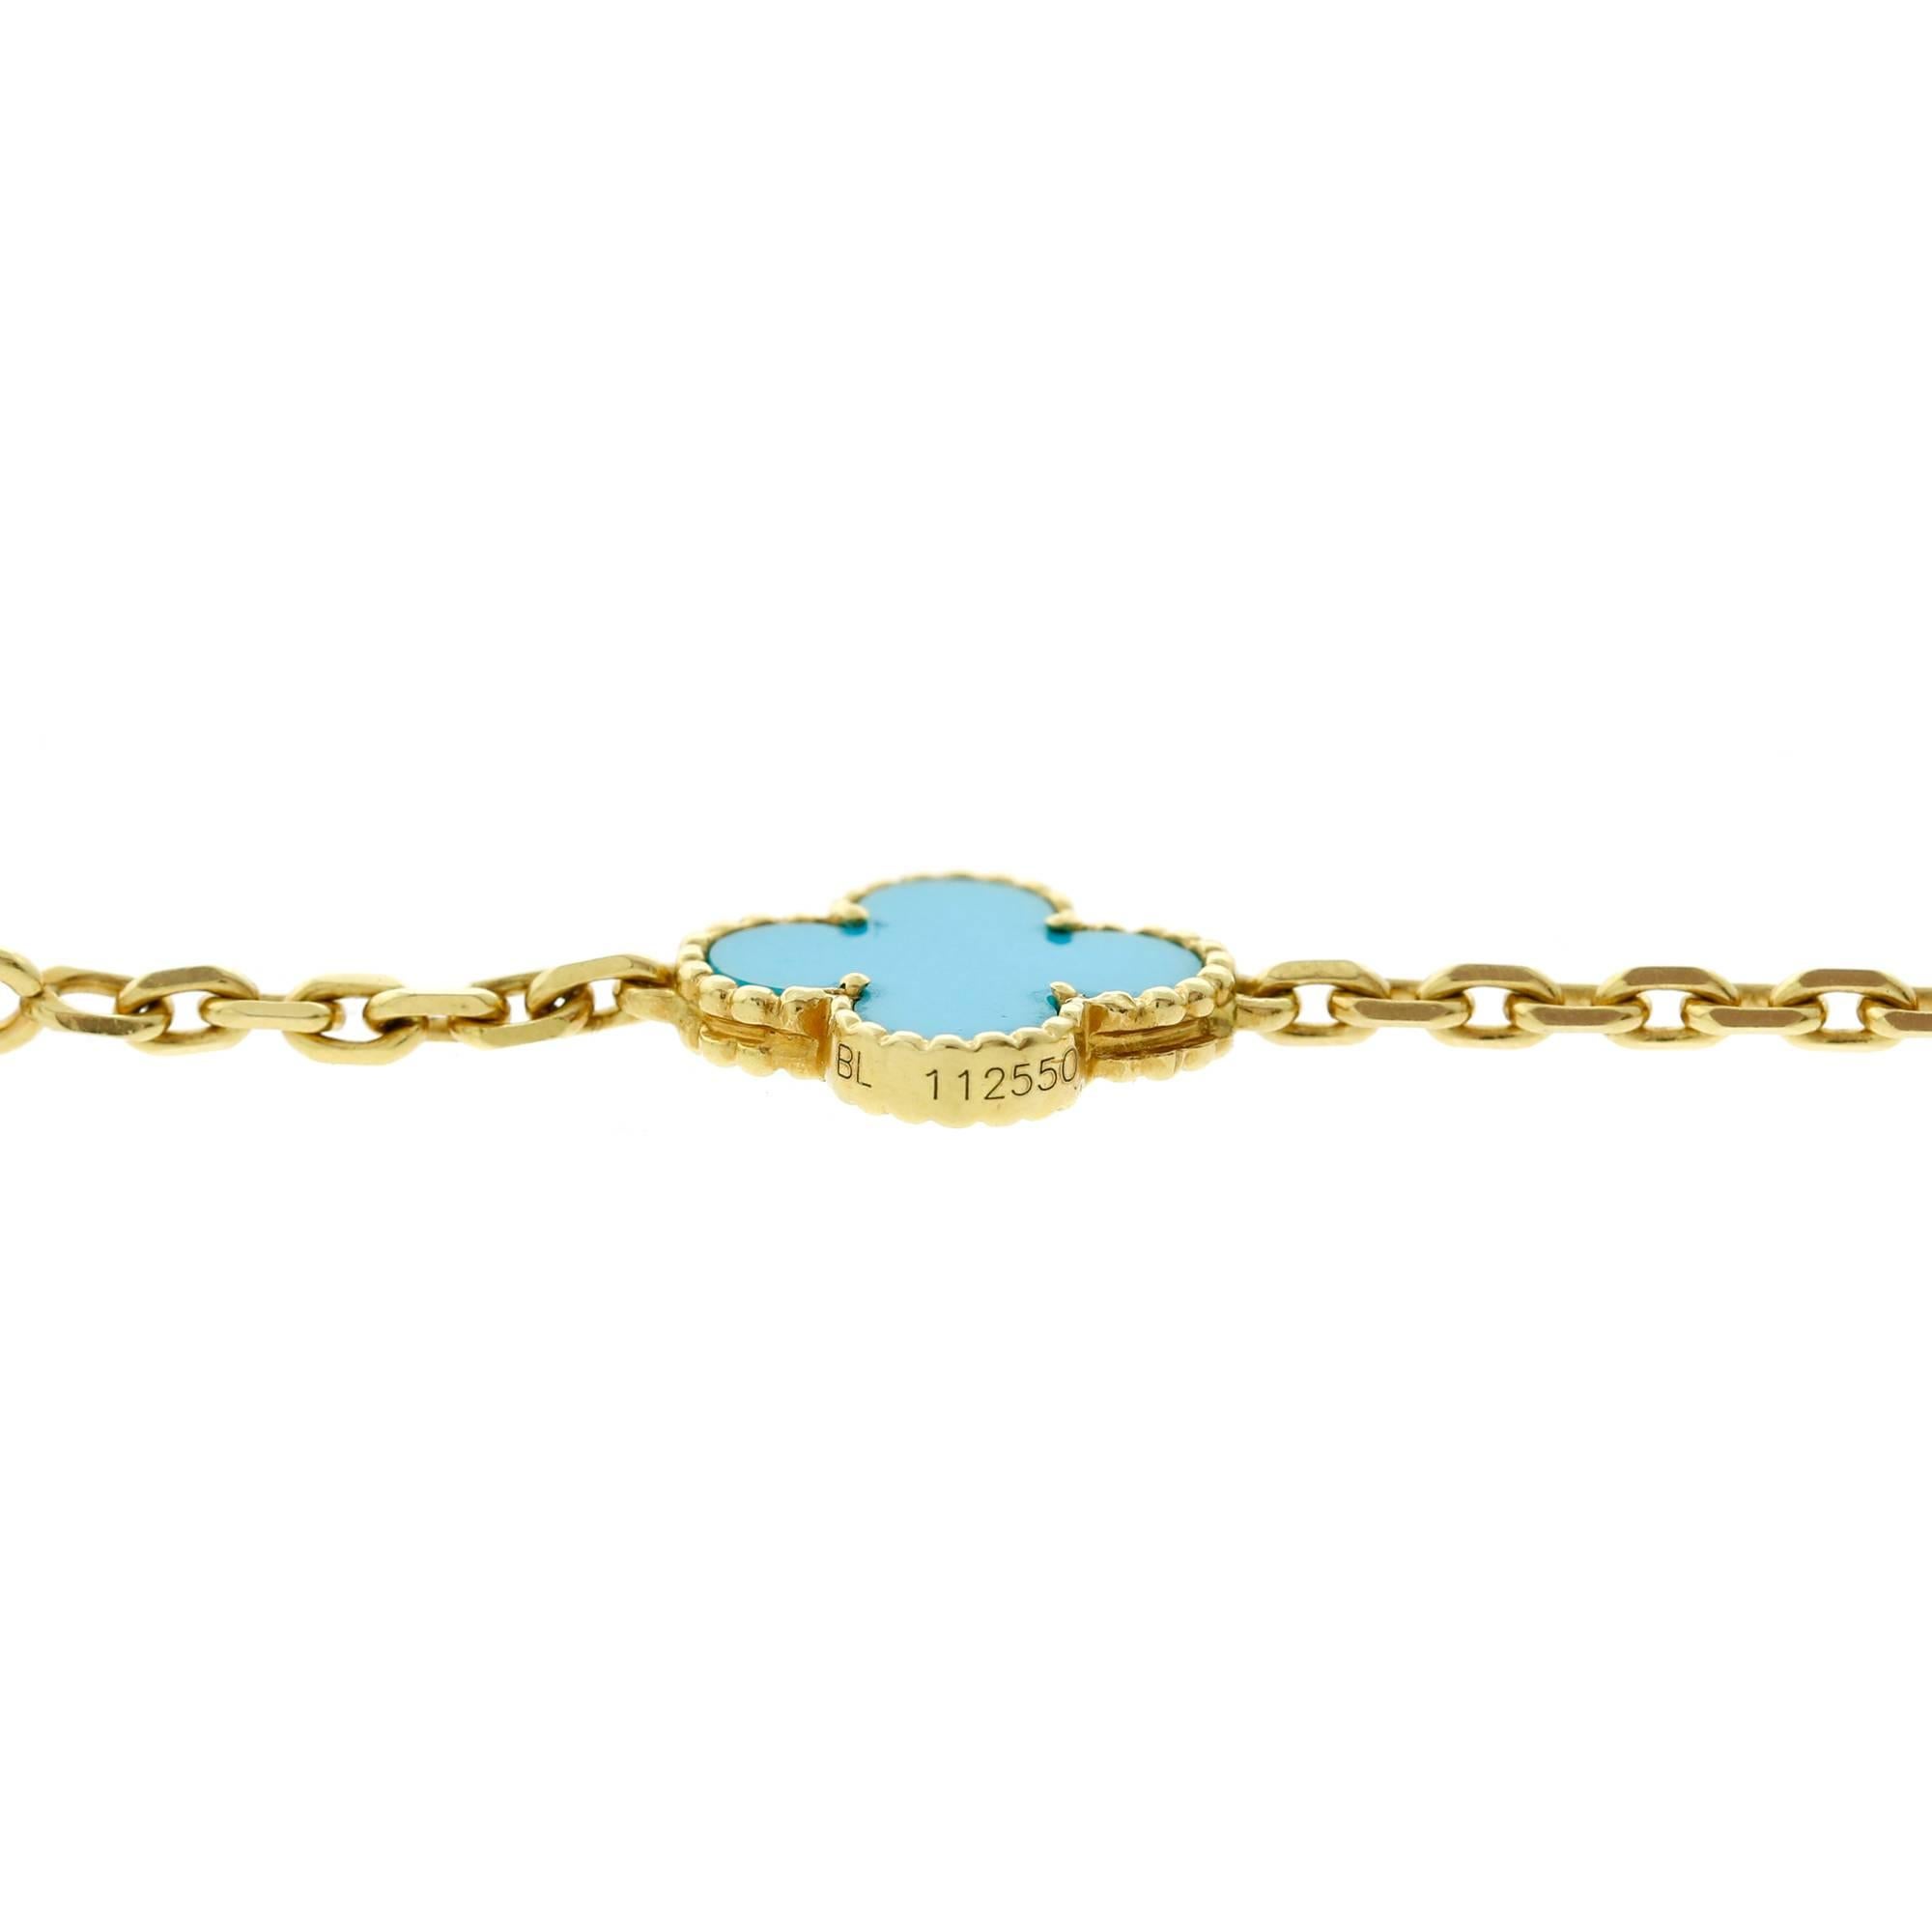 An excellent condition highly collectible Van Cleef Arpels Turquoise Vintage Alhambra Necklace in 18k yellow gold.

The necklace has a length of 16.5" and each motif has a diameter of .59"

This magnificent piece is offered by Opulent